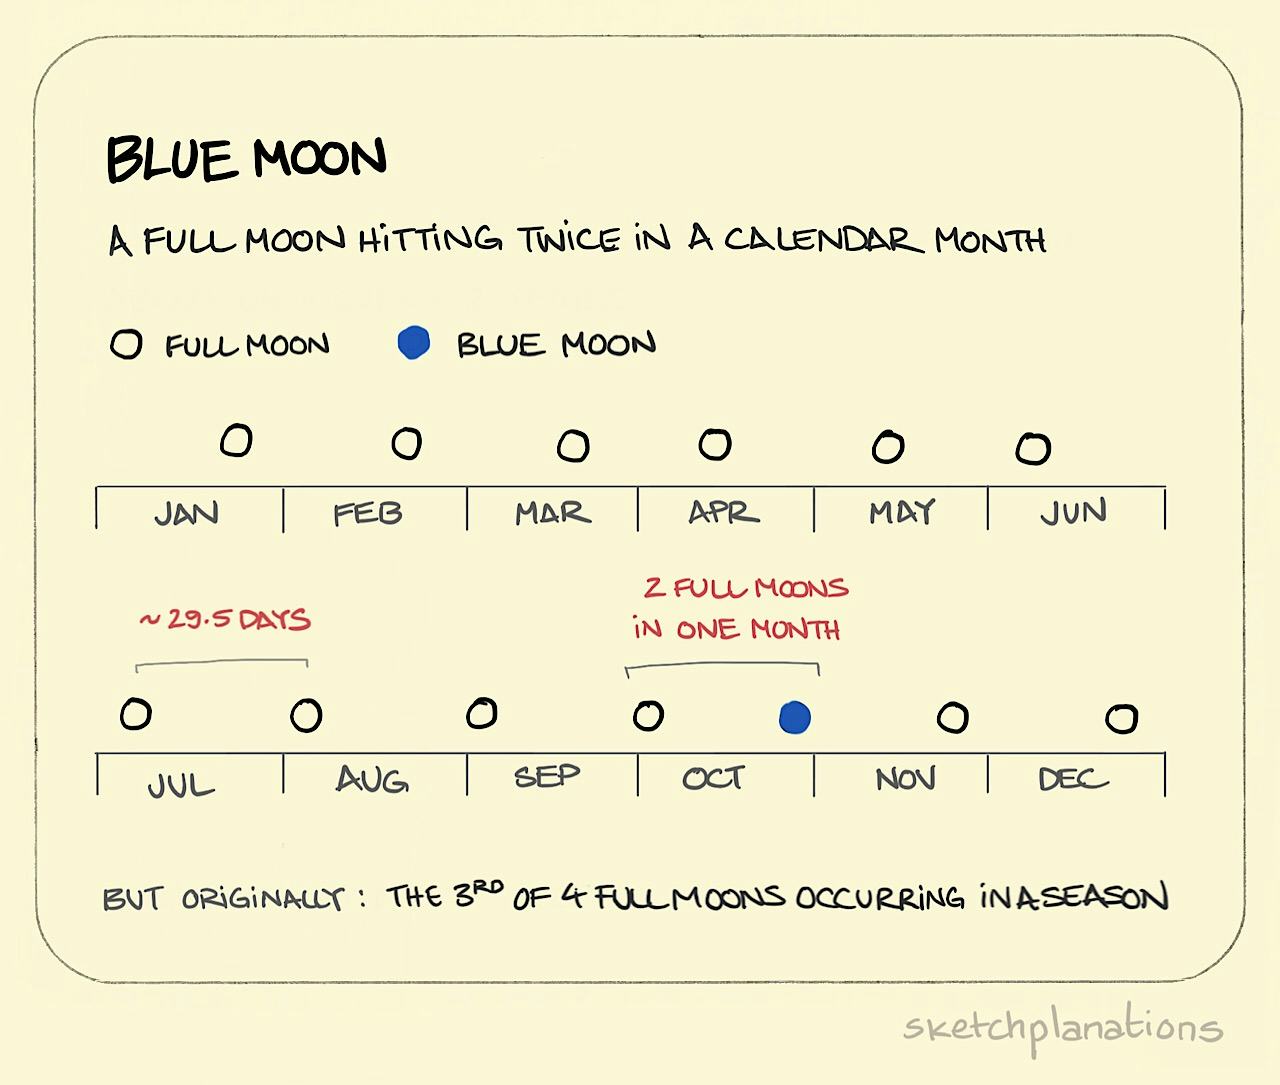 What is a blue moon? - Sketchplanations